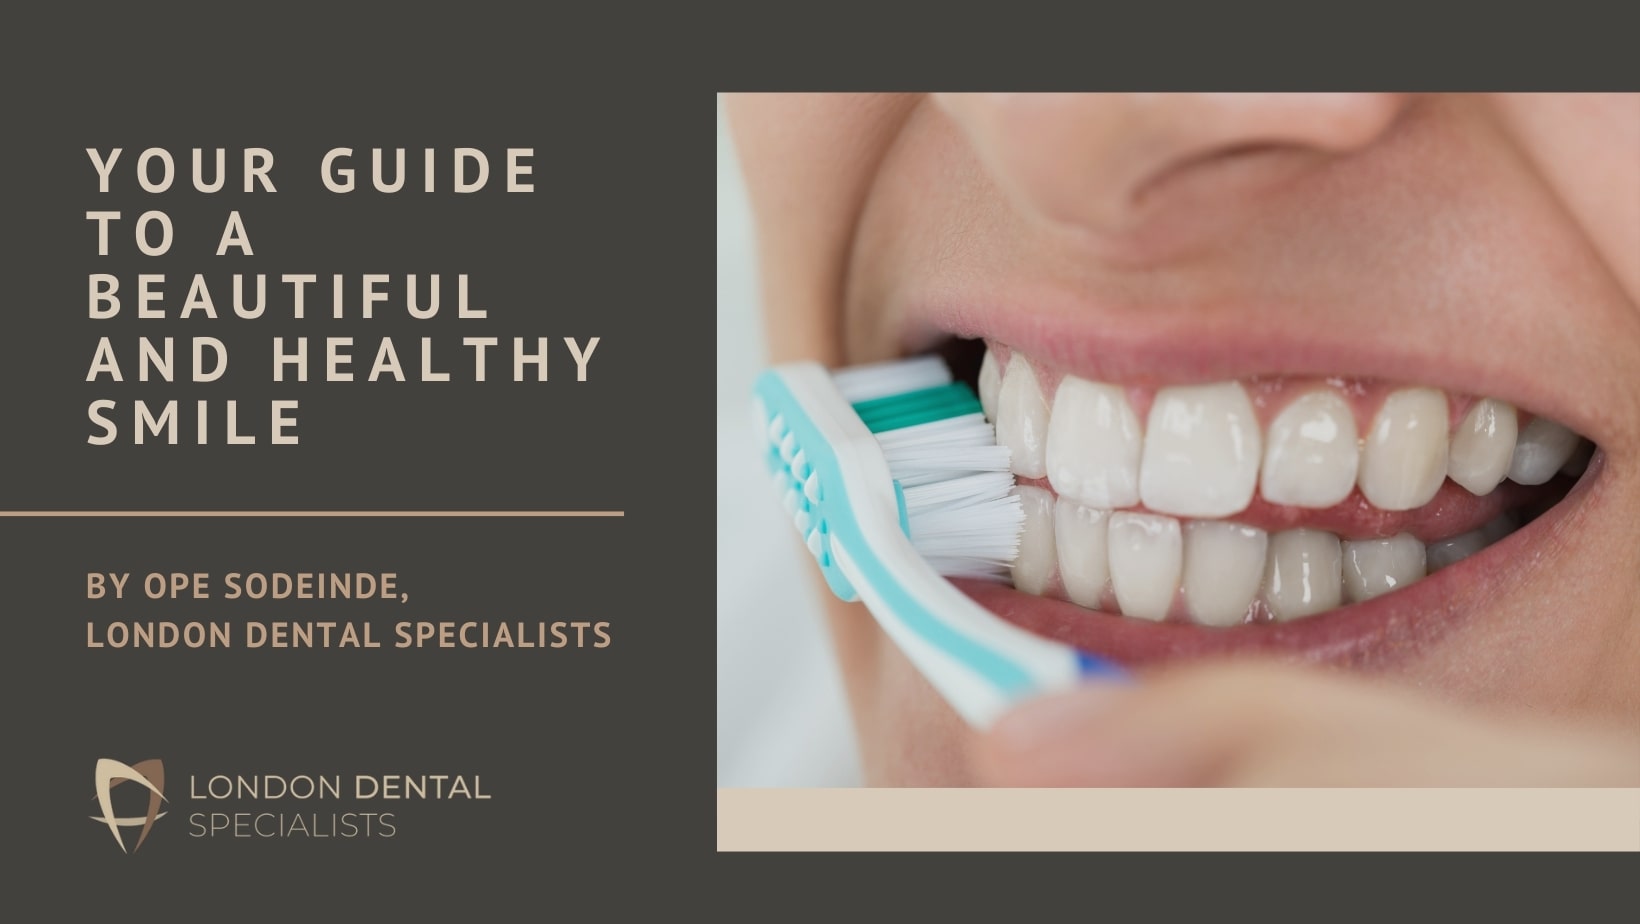 Your Guide To A Beautiful and Healthy Smile